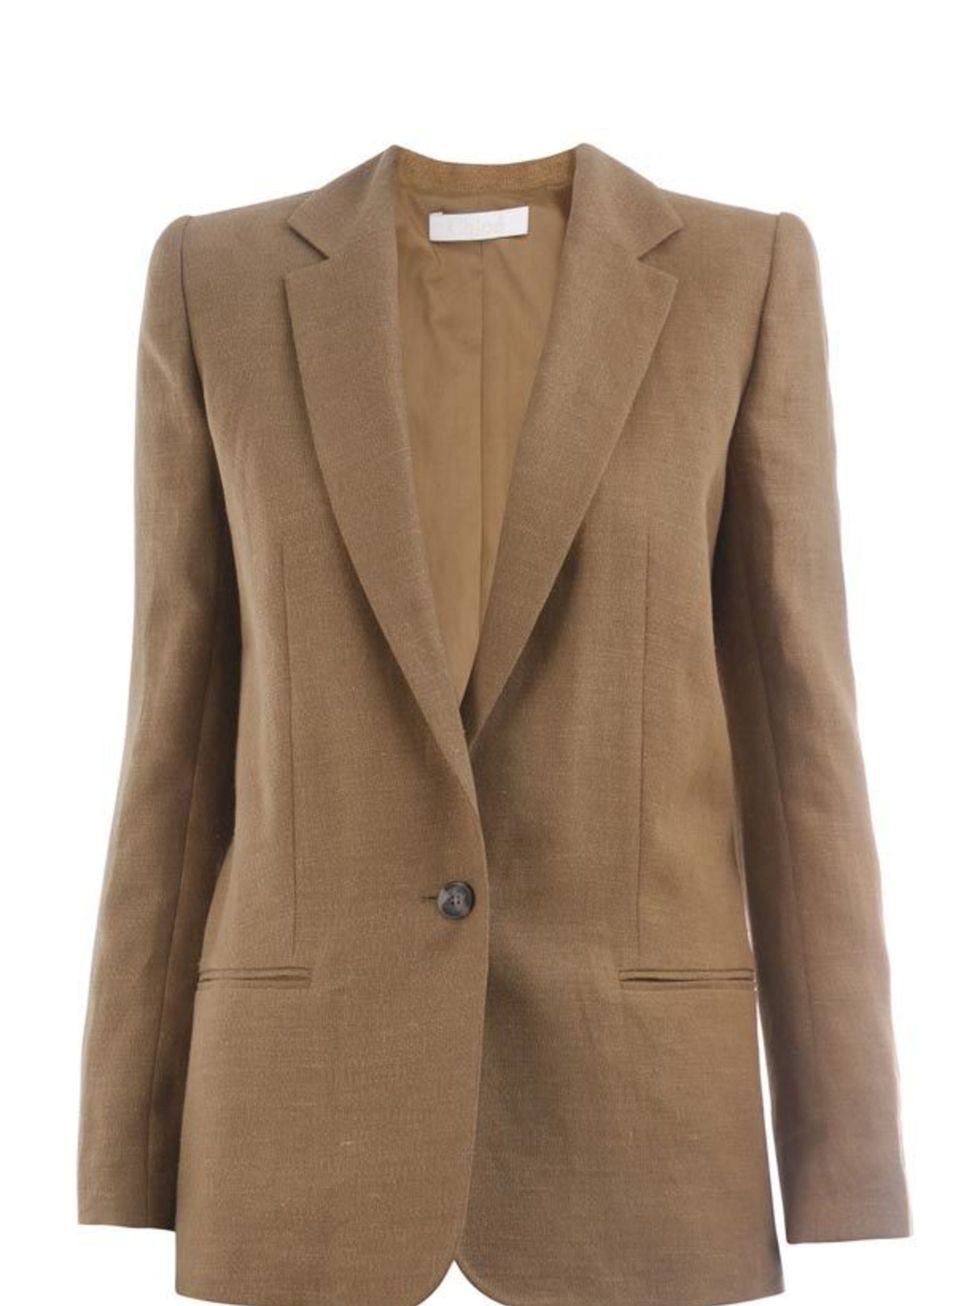 <p>Brown linen blazer, £898, by Chloe at <a href="http://www.matchesfashion.com/fcp/product/Matches-Fashion/womens_chloe/chloe-CHL-X-VE22-10E040-jackets-BROWN/38043">Matches</a></p>